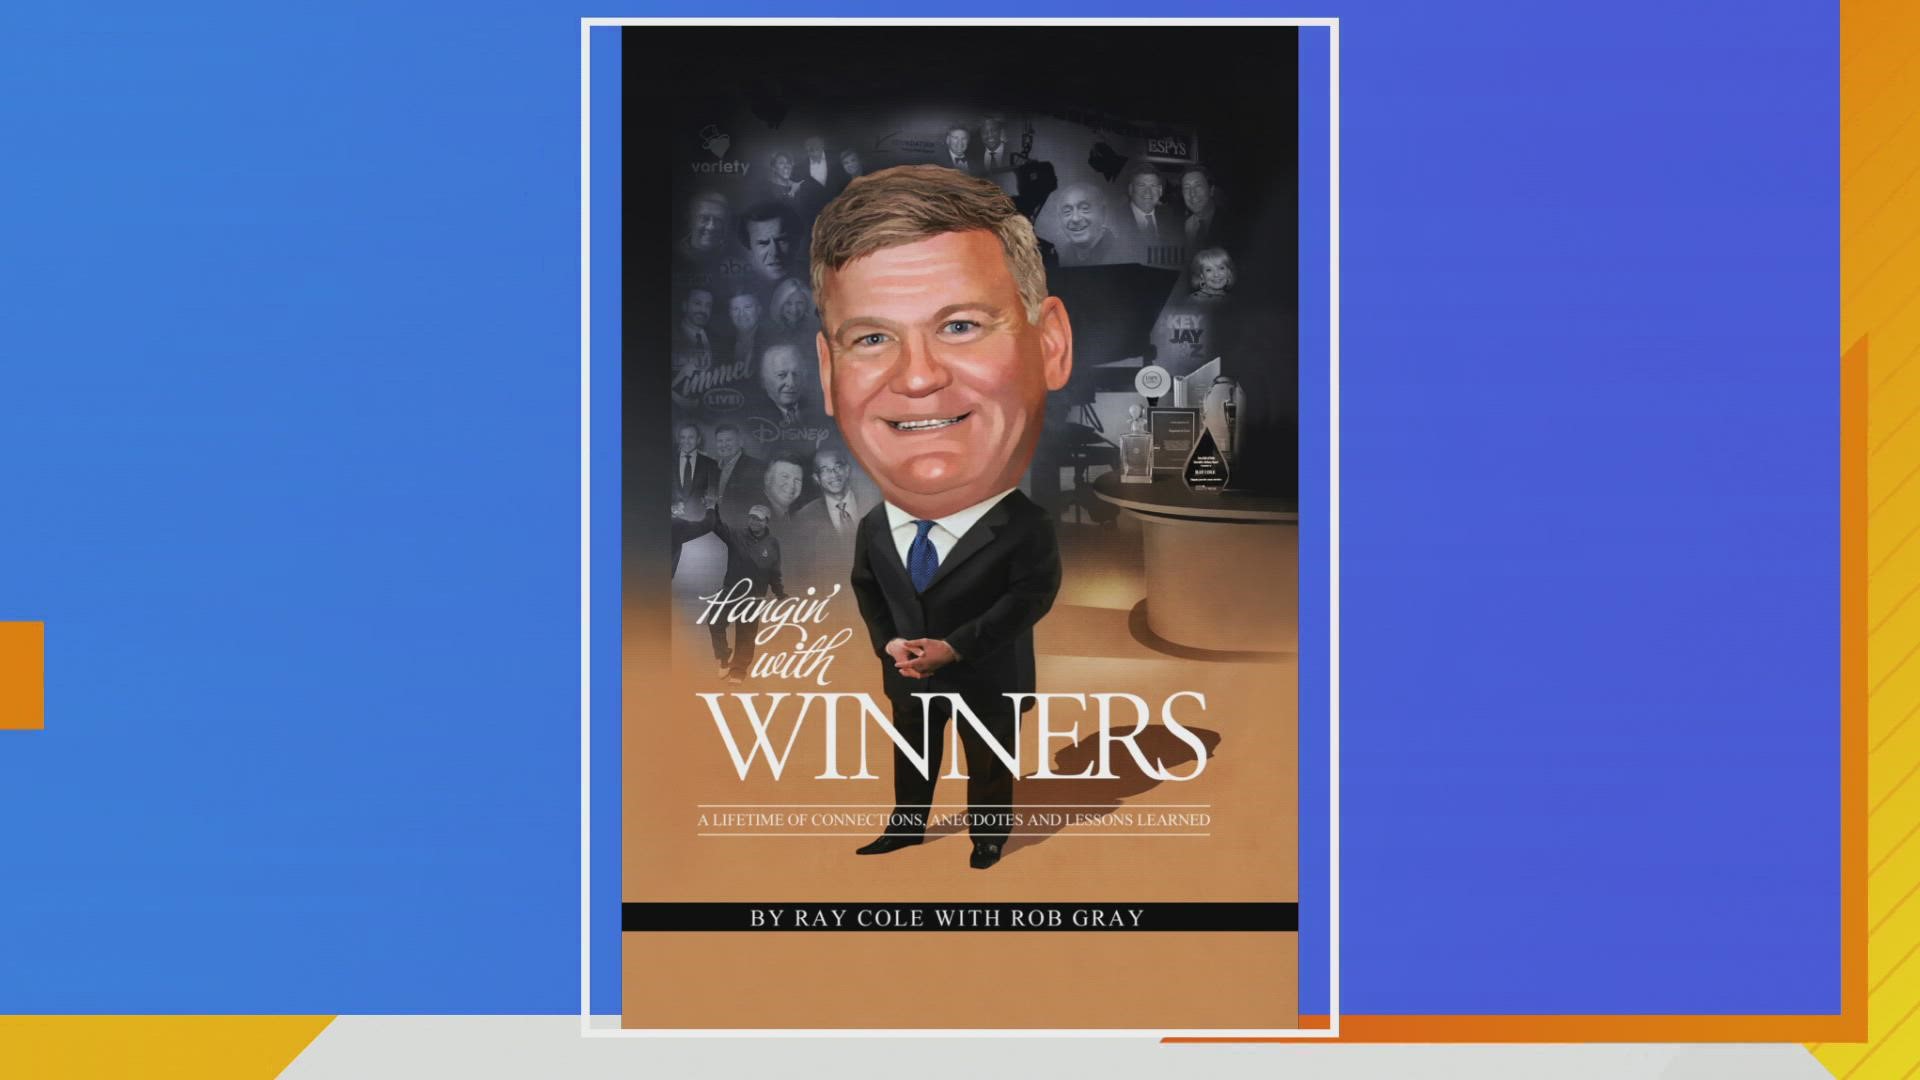 "Hangin' with Winners: A Lifetime of Connections, Anecdotes and Lessons Learned" by Ray Cole with Rob Gray (available Oct. 5th) will benefit six charities!